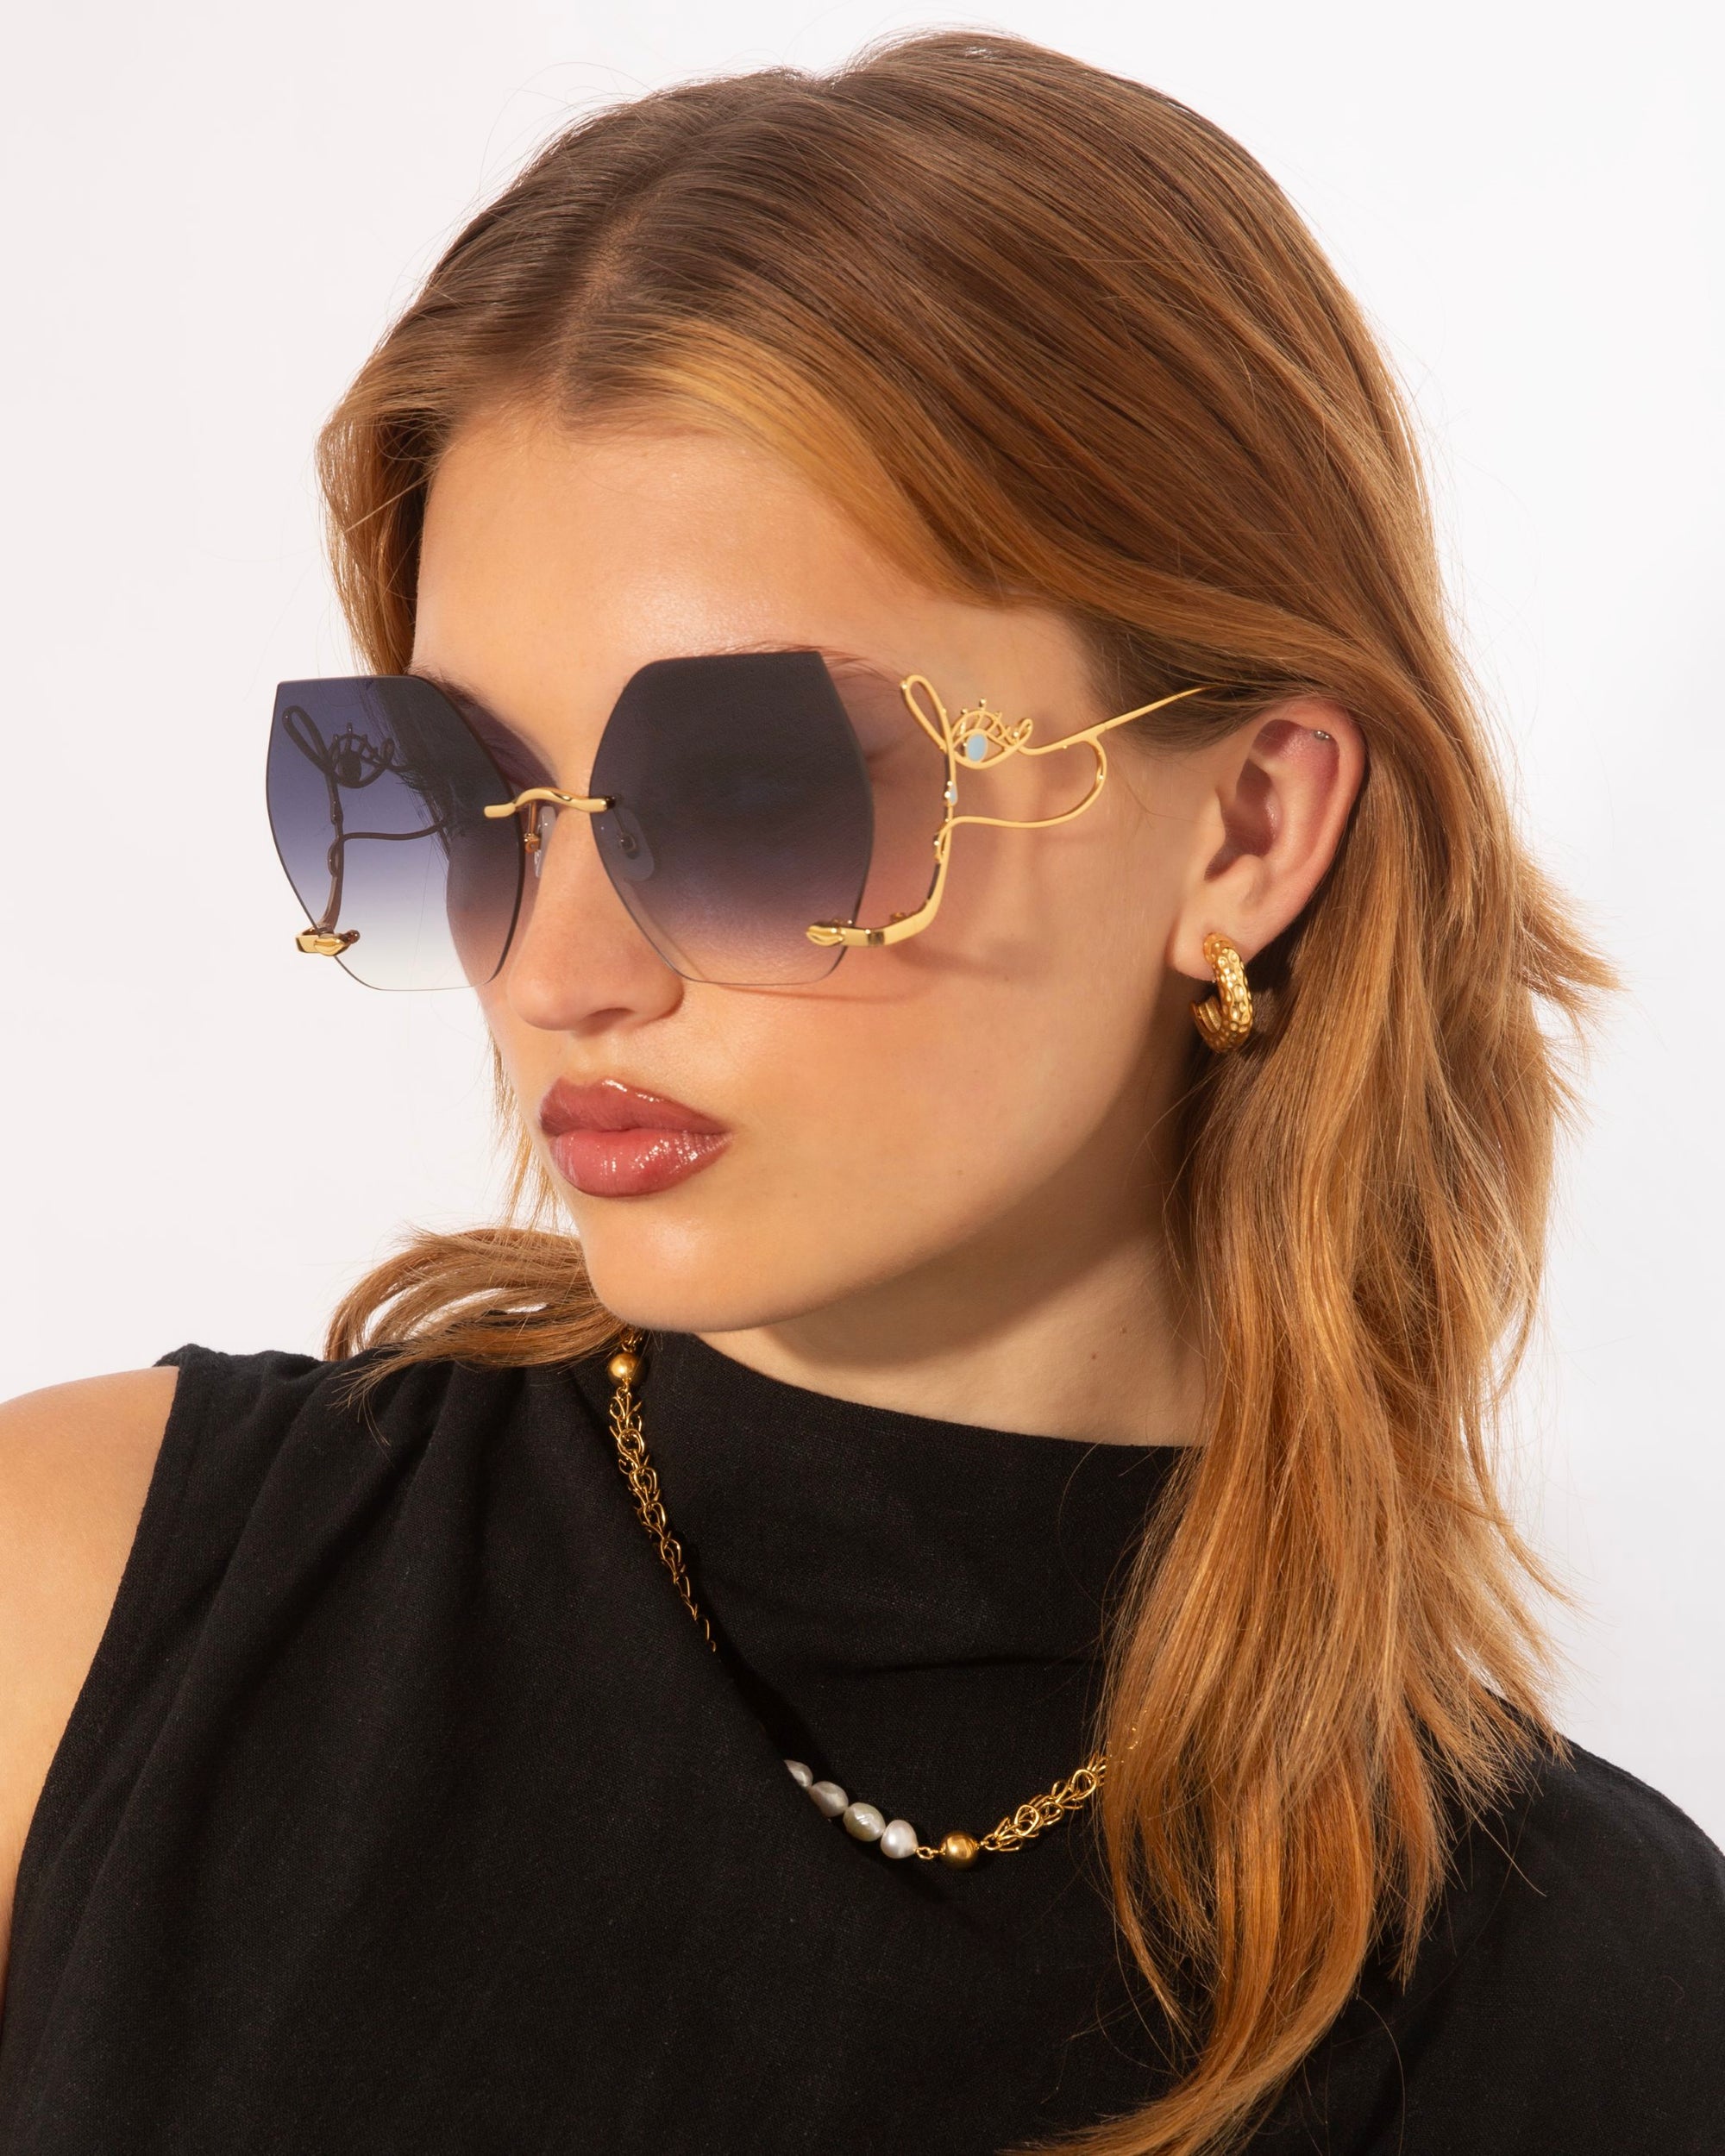 A woman with light brown hair wears oversized, gradient Cry Me a River sunglasses with gold detailing. She is dressed in a black top and accessorizes with hoop earrings and a gold chain necklace. Like Julie London's song, this limited edition style by For Art's Sake® exudes timeless elegance as she looks to her left against a plain white background.